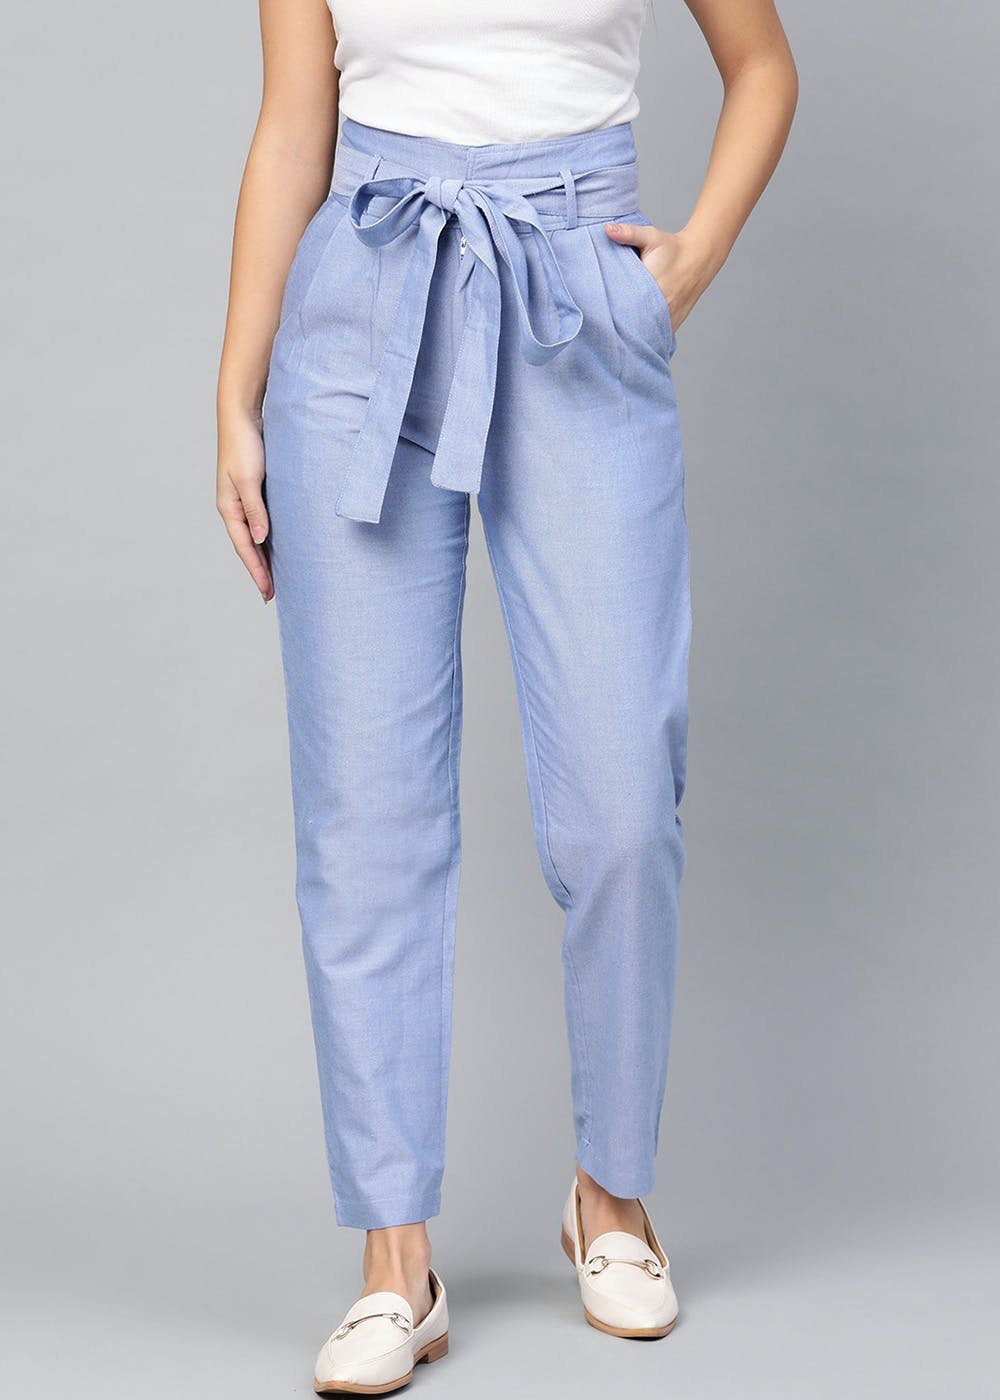 Buy knot pants for women in India @ Limeroad